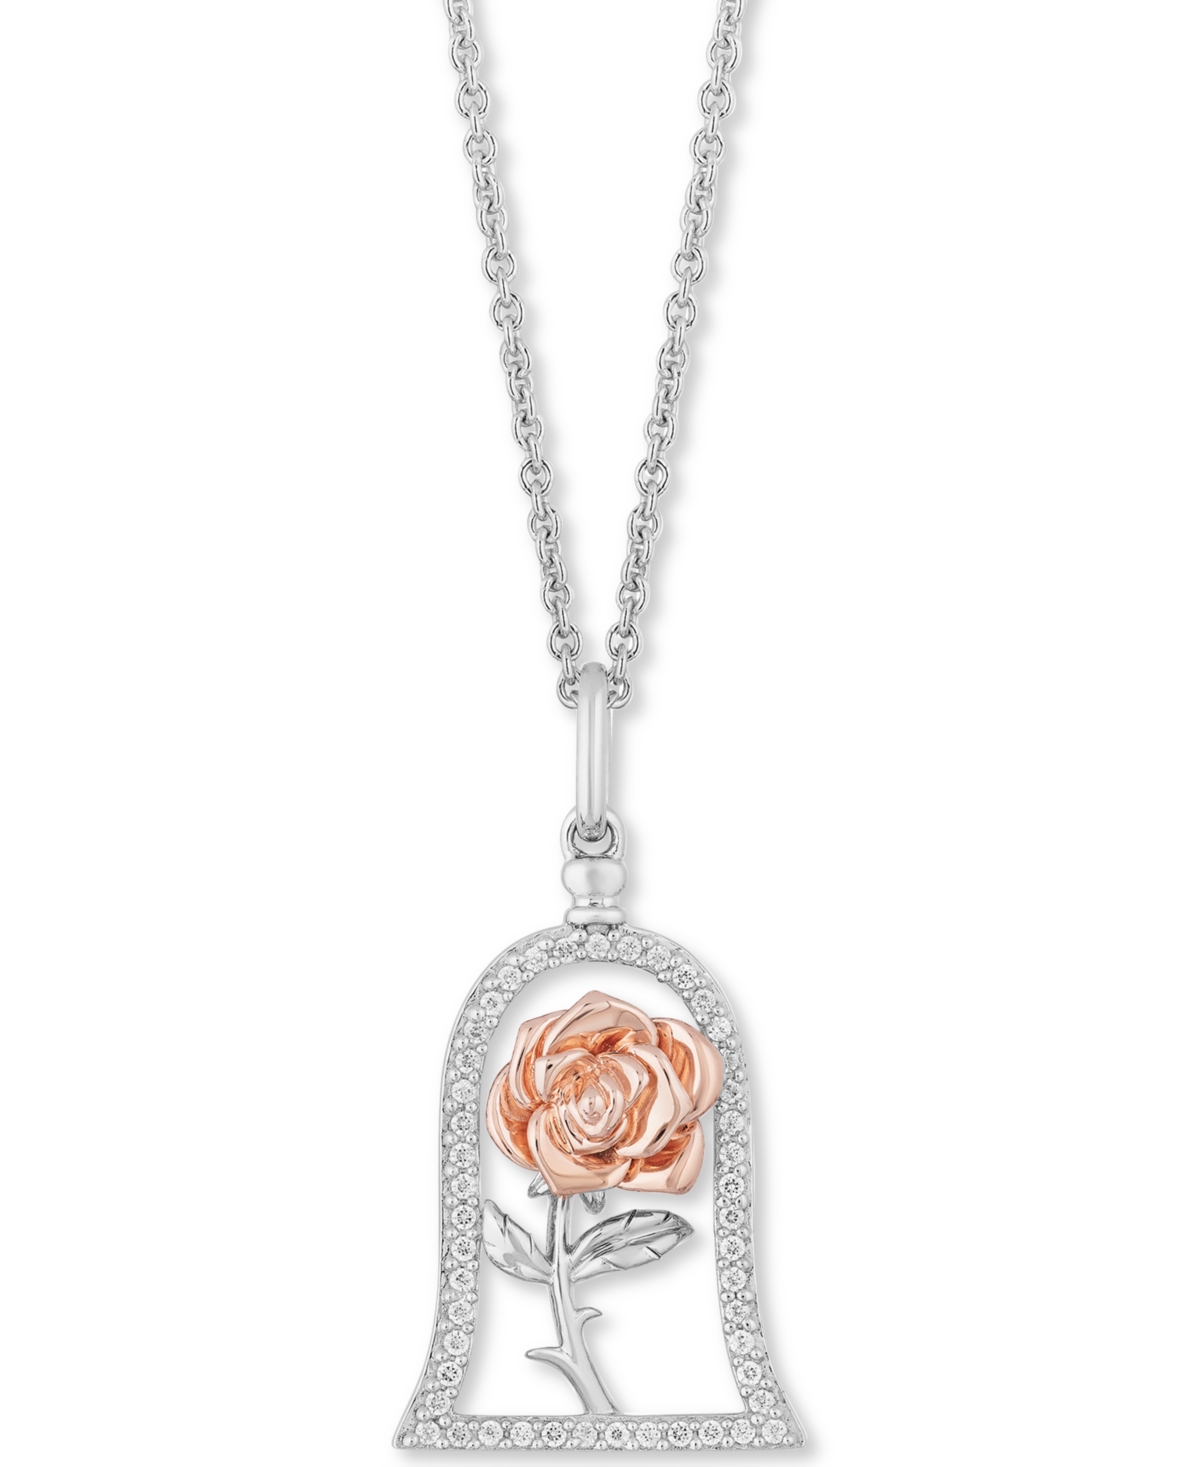 Enchanted Disney Diamond Rose Belle Pendant Necklace (1/5 ct. t.w.) in Sterling Silver & 14k Rose Gold - Sterling Silver / Rose Gold